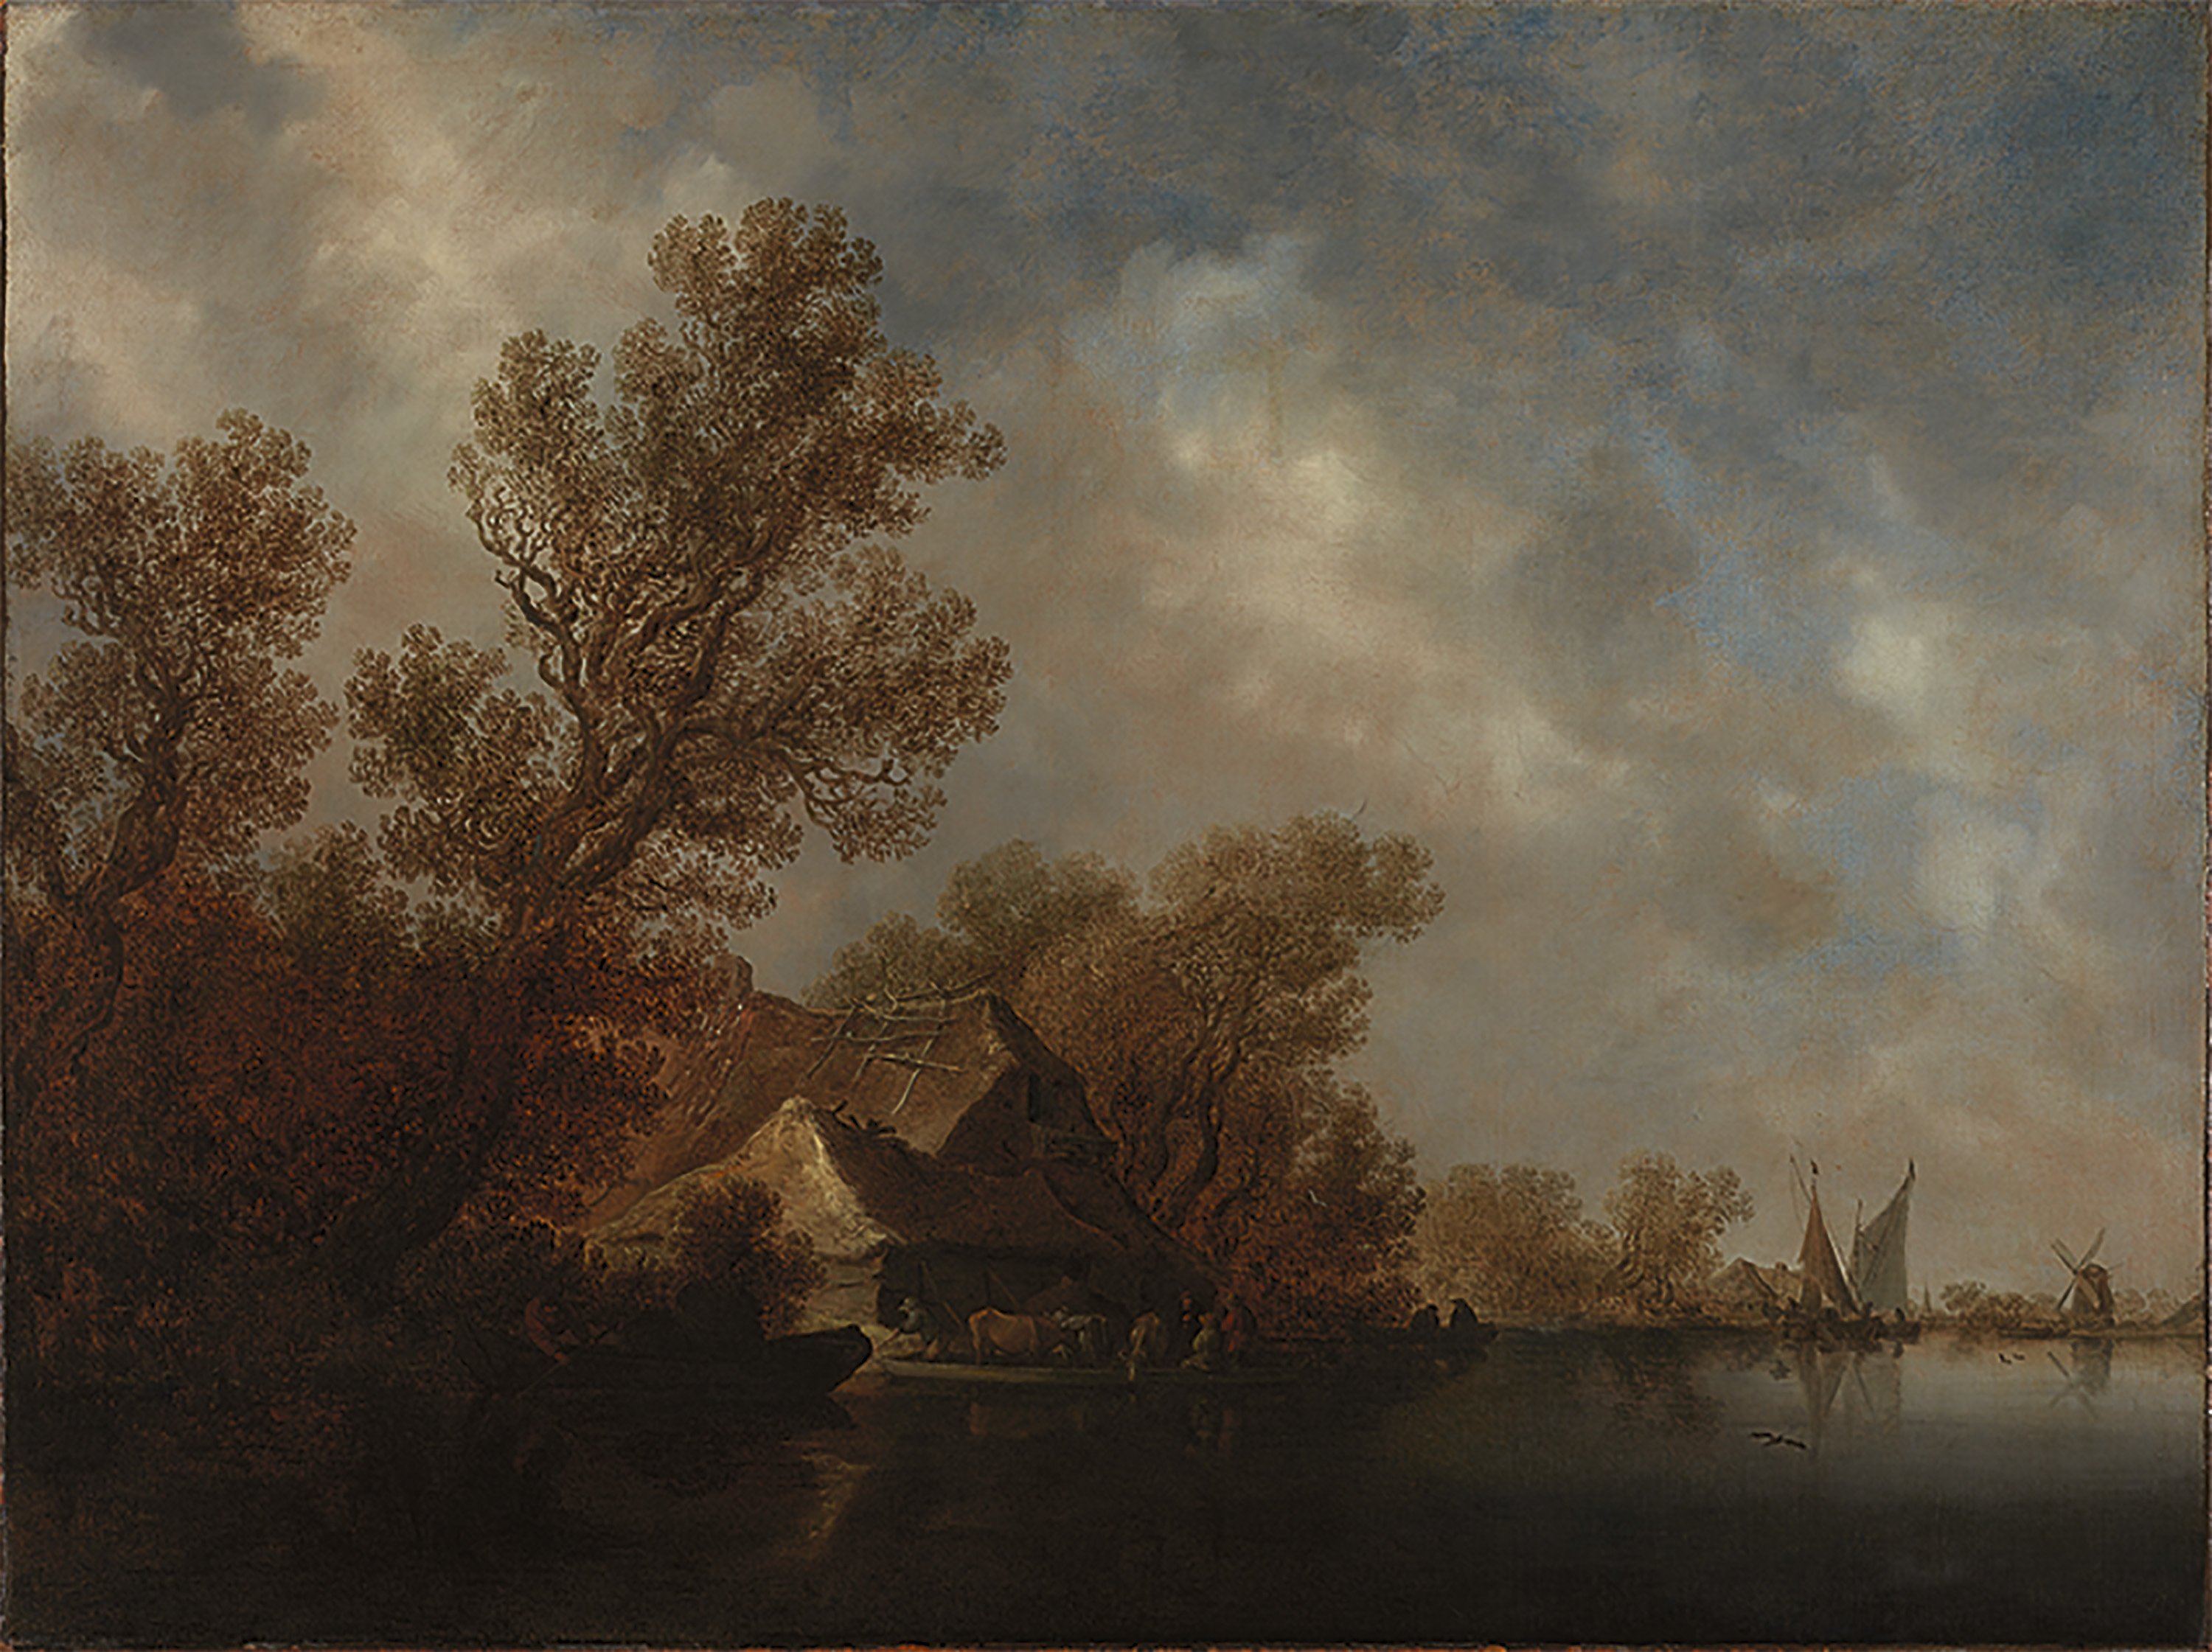 River Landscape with Ferry Boat and Cottages. Paisaje fluvial con transbordador y cabañas, 1634